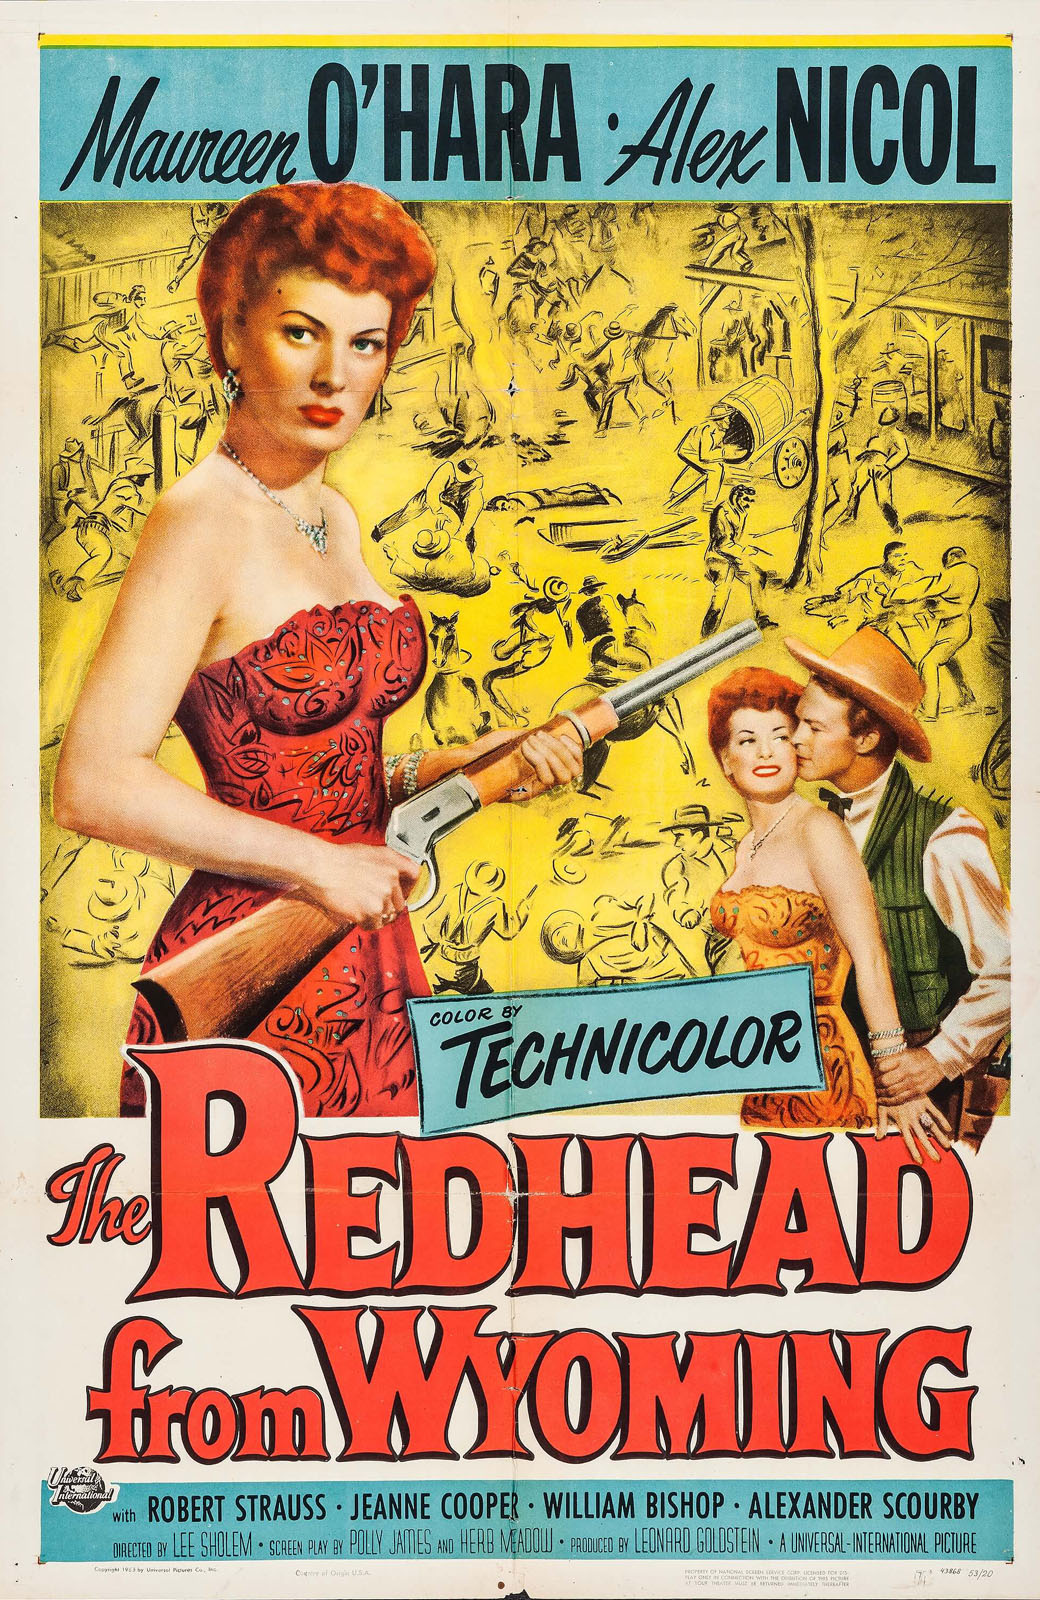 REDHEAD FROM WYOMING, THE